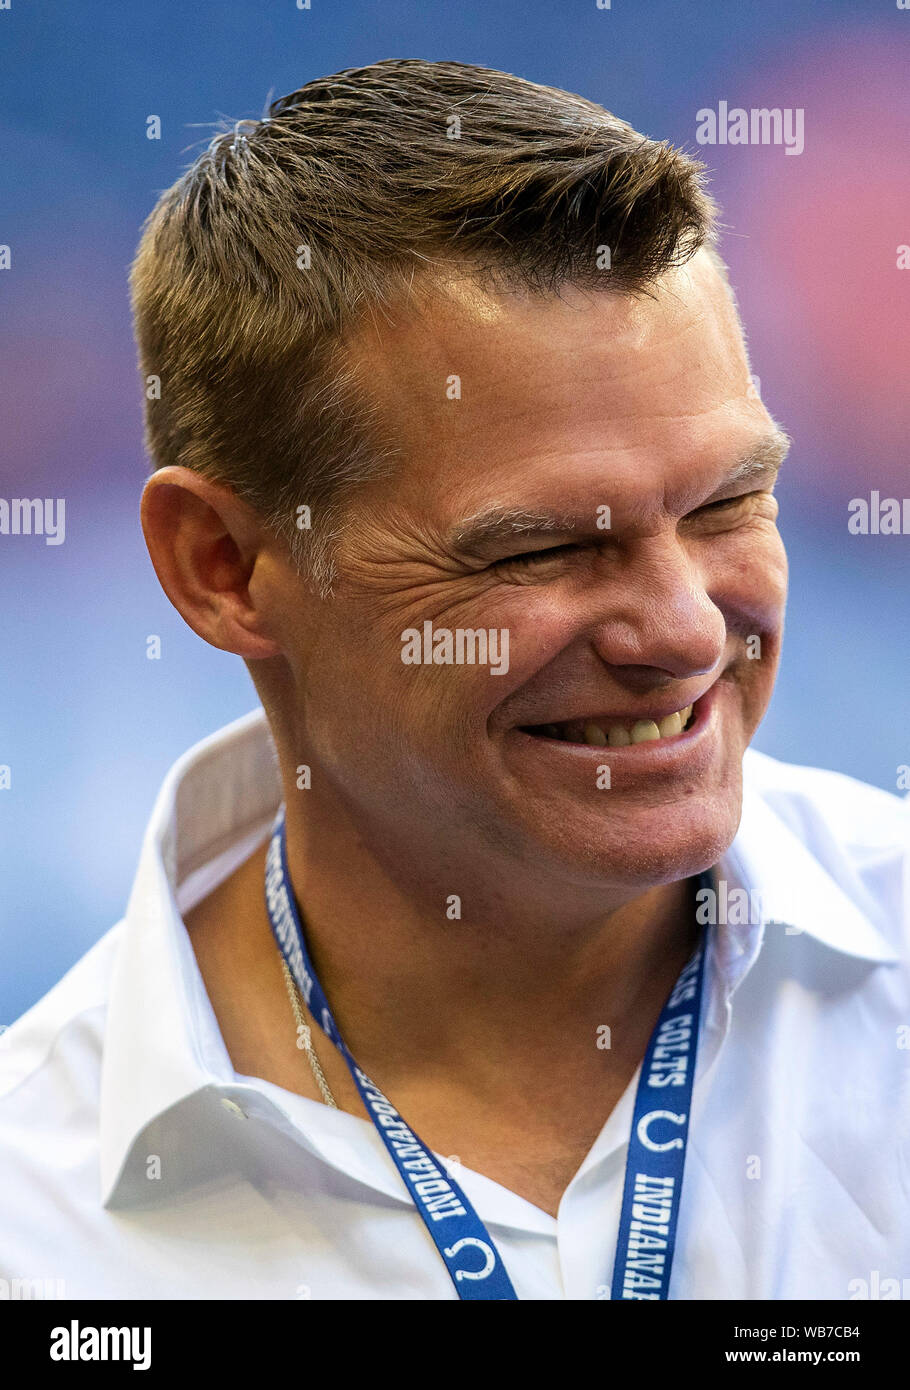 Indianapolis, Indiana, USA. 24th August, 2019.  Colts General Manage Chris Ballard during pregame of NFL football preseason game action between the Chicago Bears and the Indianapolis Colts at Lucas Oil Stadium in Indianapolis, Indiana. Chicago defeated Indianapolis 27-17. John Mersits/CSM. Credit: Cal Sport Media/Alamy Live News Stock Photo